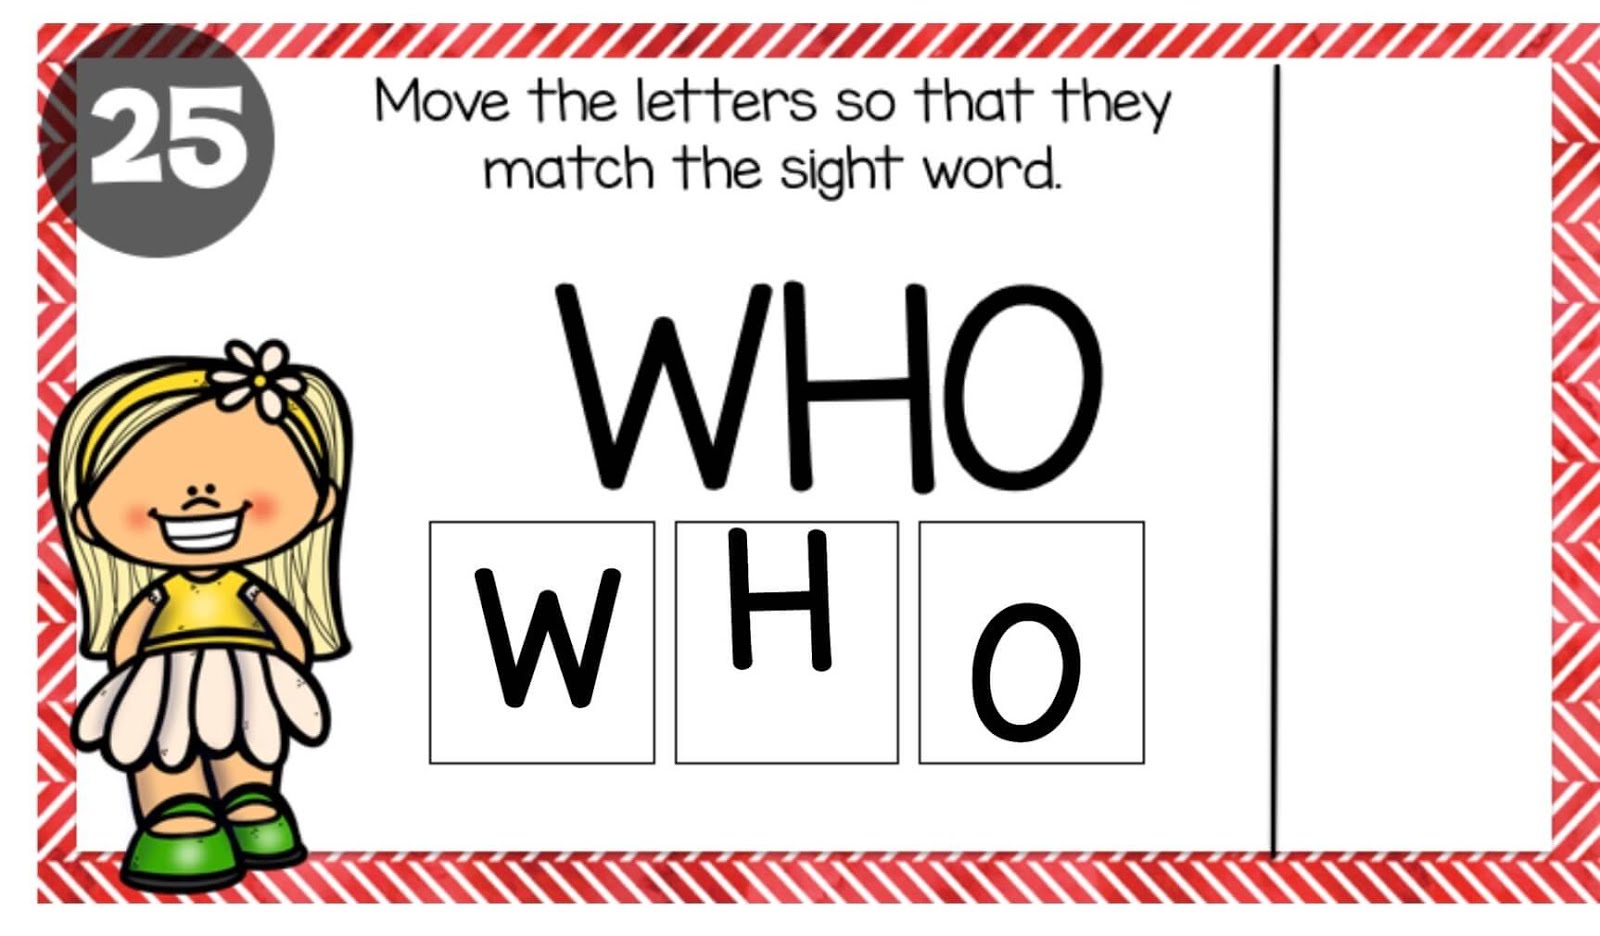 Boom example sight words